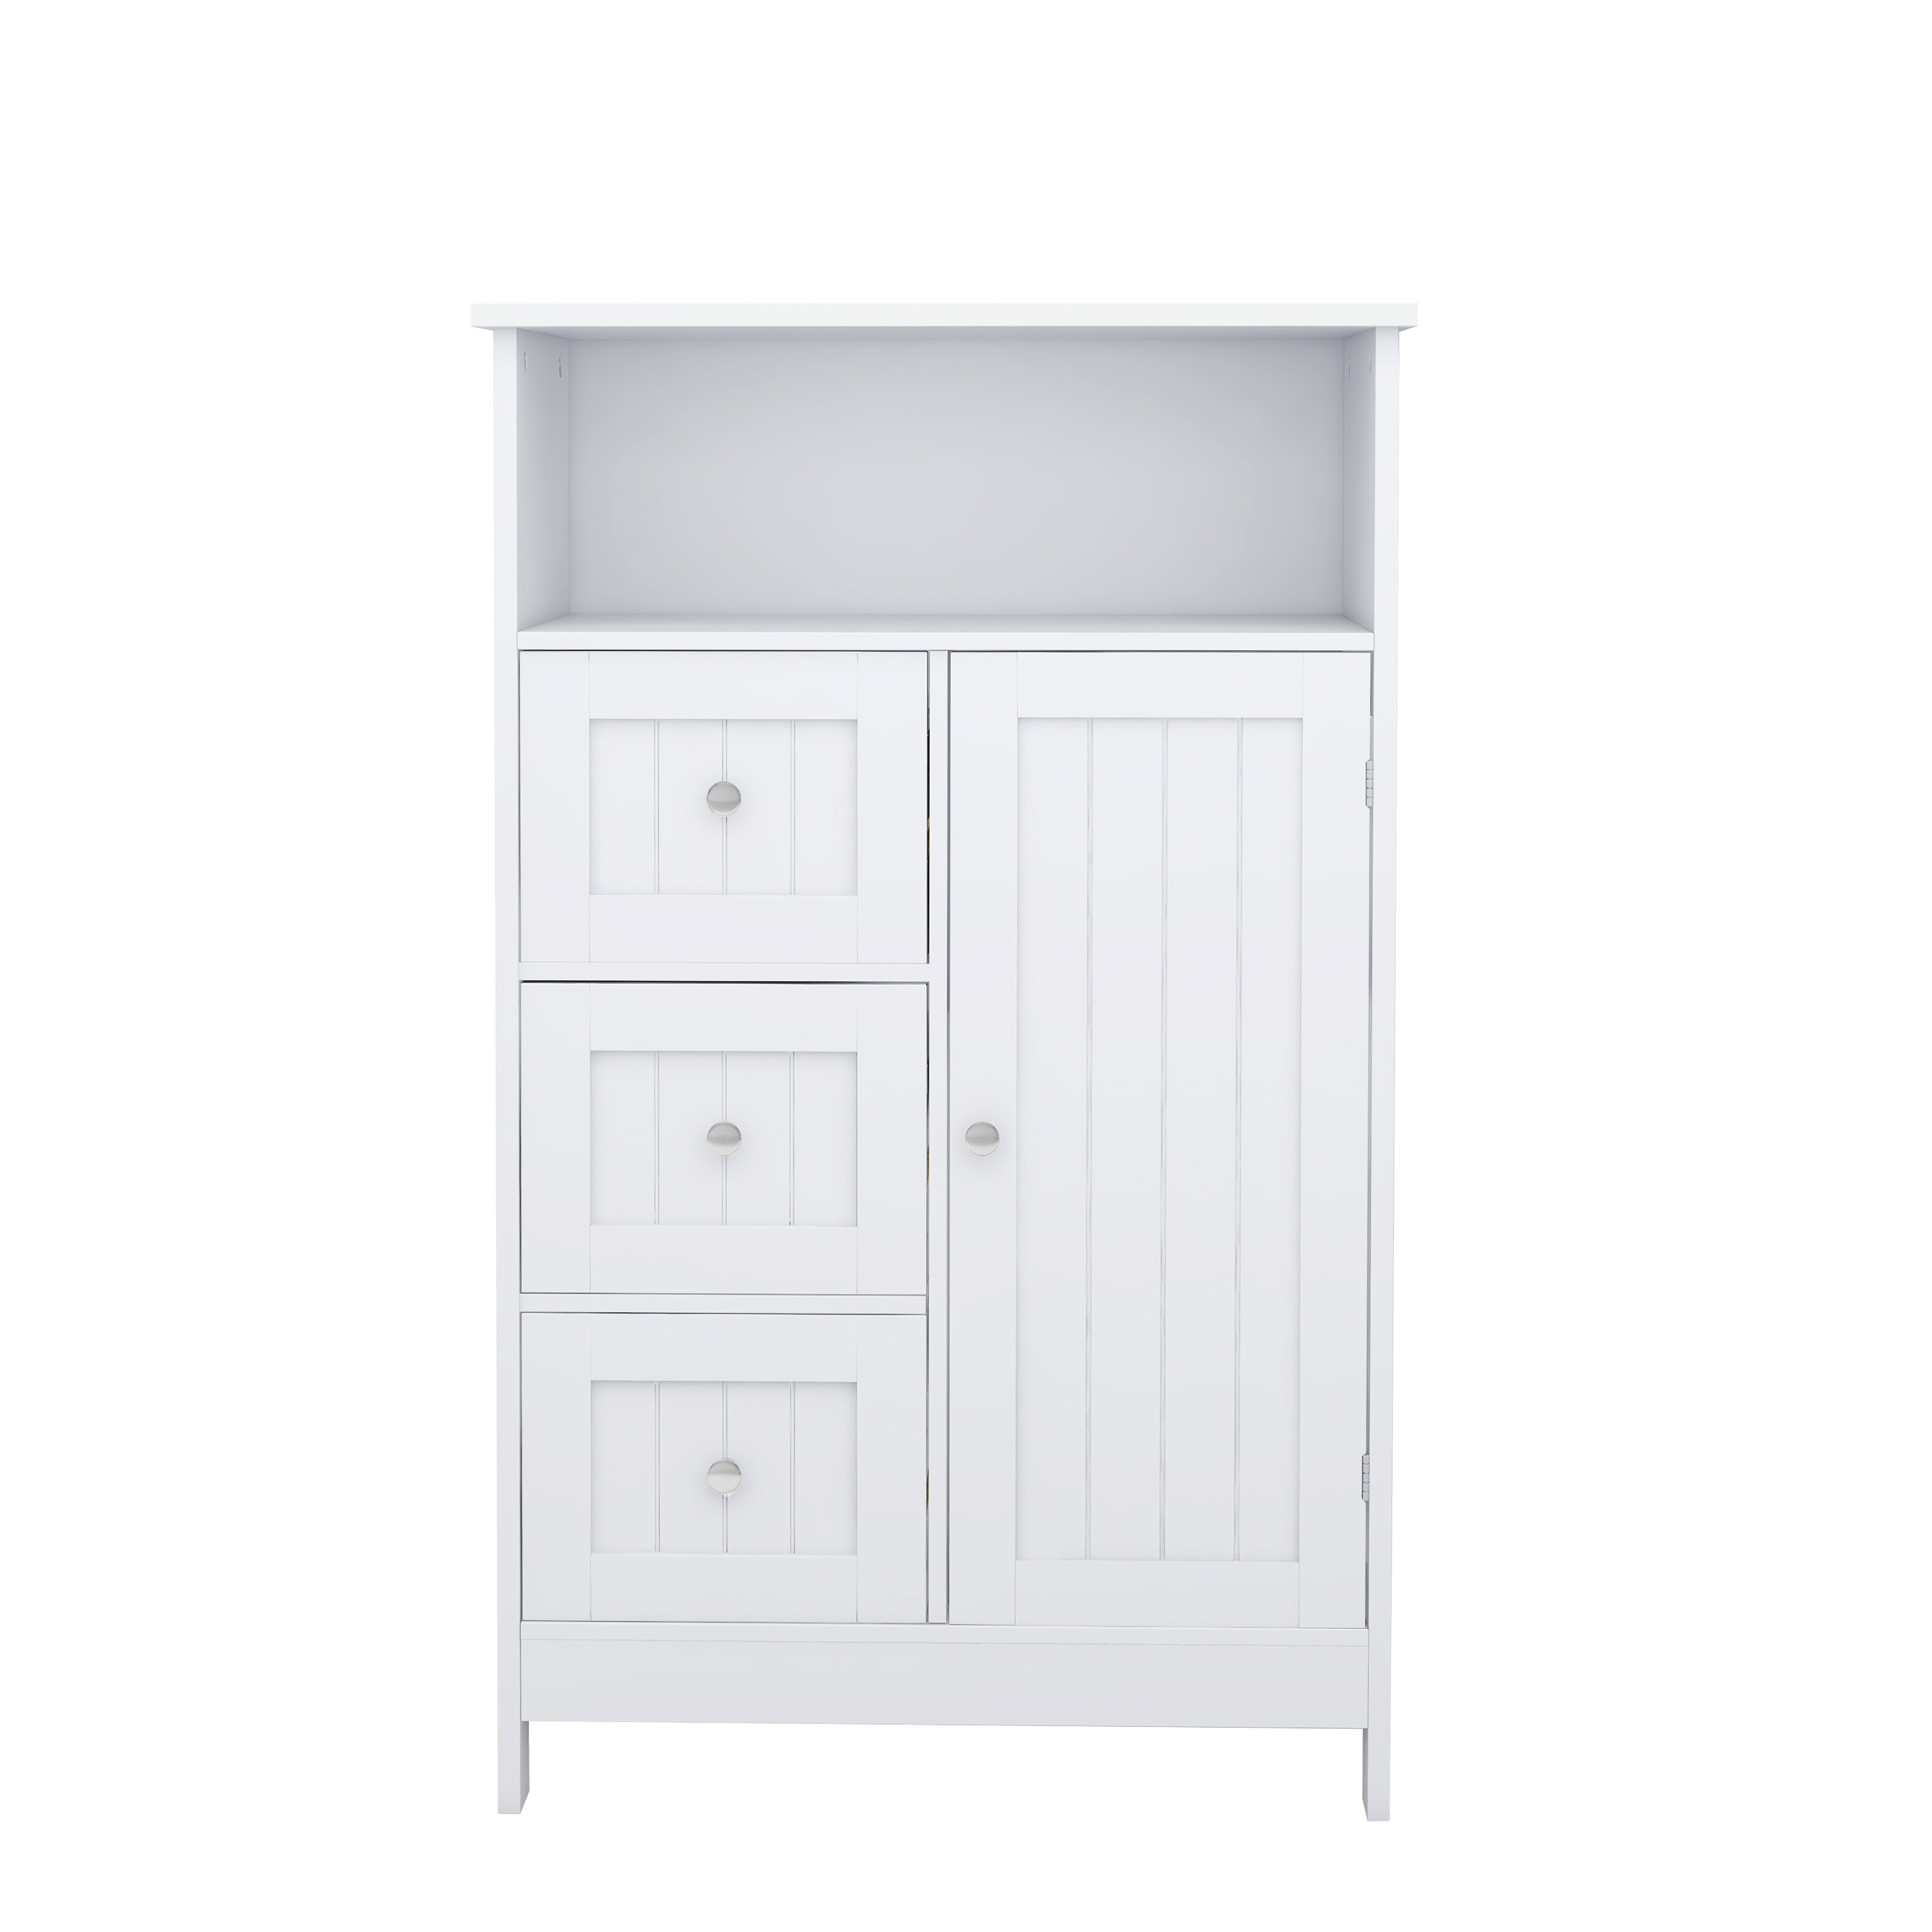 https://ak1.ostkcdn.com/images/products/is/images/direct/d90f6ef2bc835f62e91fdf788652c7ee8e718223/Nestfair-White-Bathroom-Standing-Storage-Cabinet-with-3-Drawers-and-1-Door.jpg